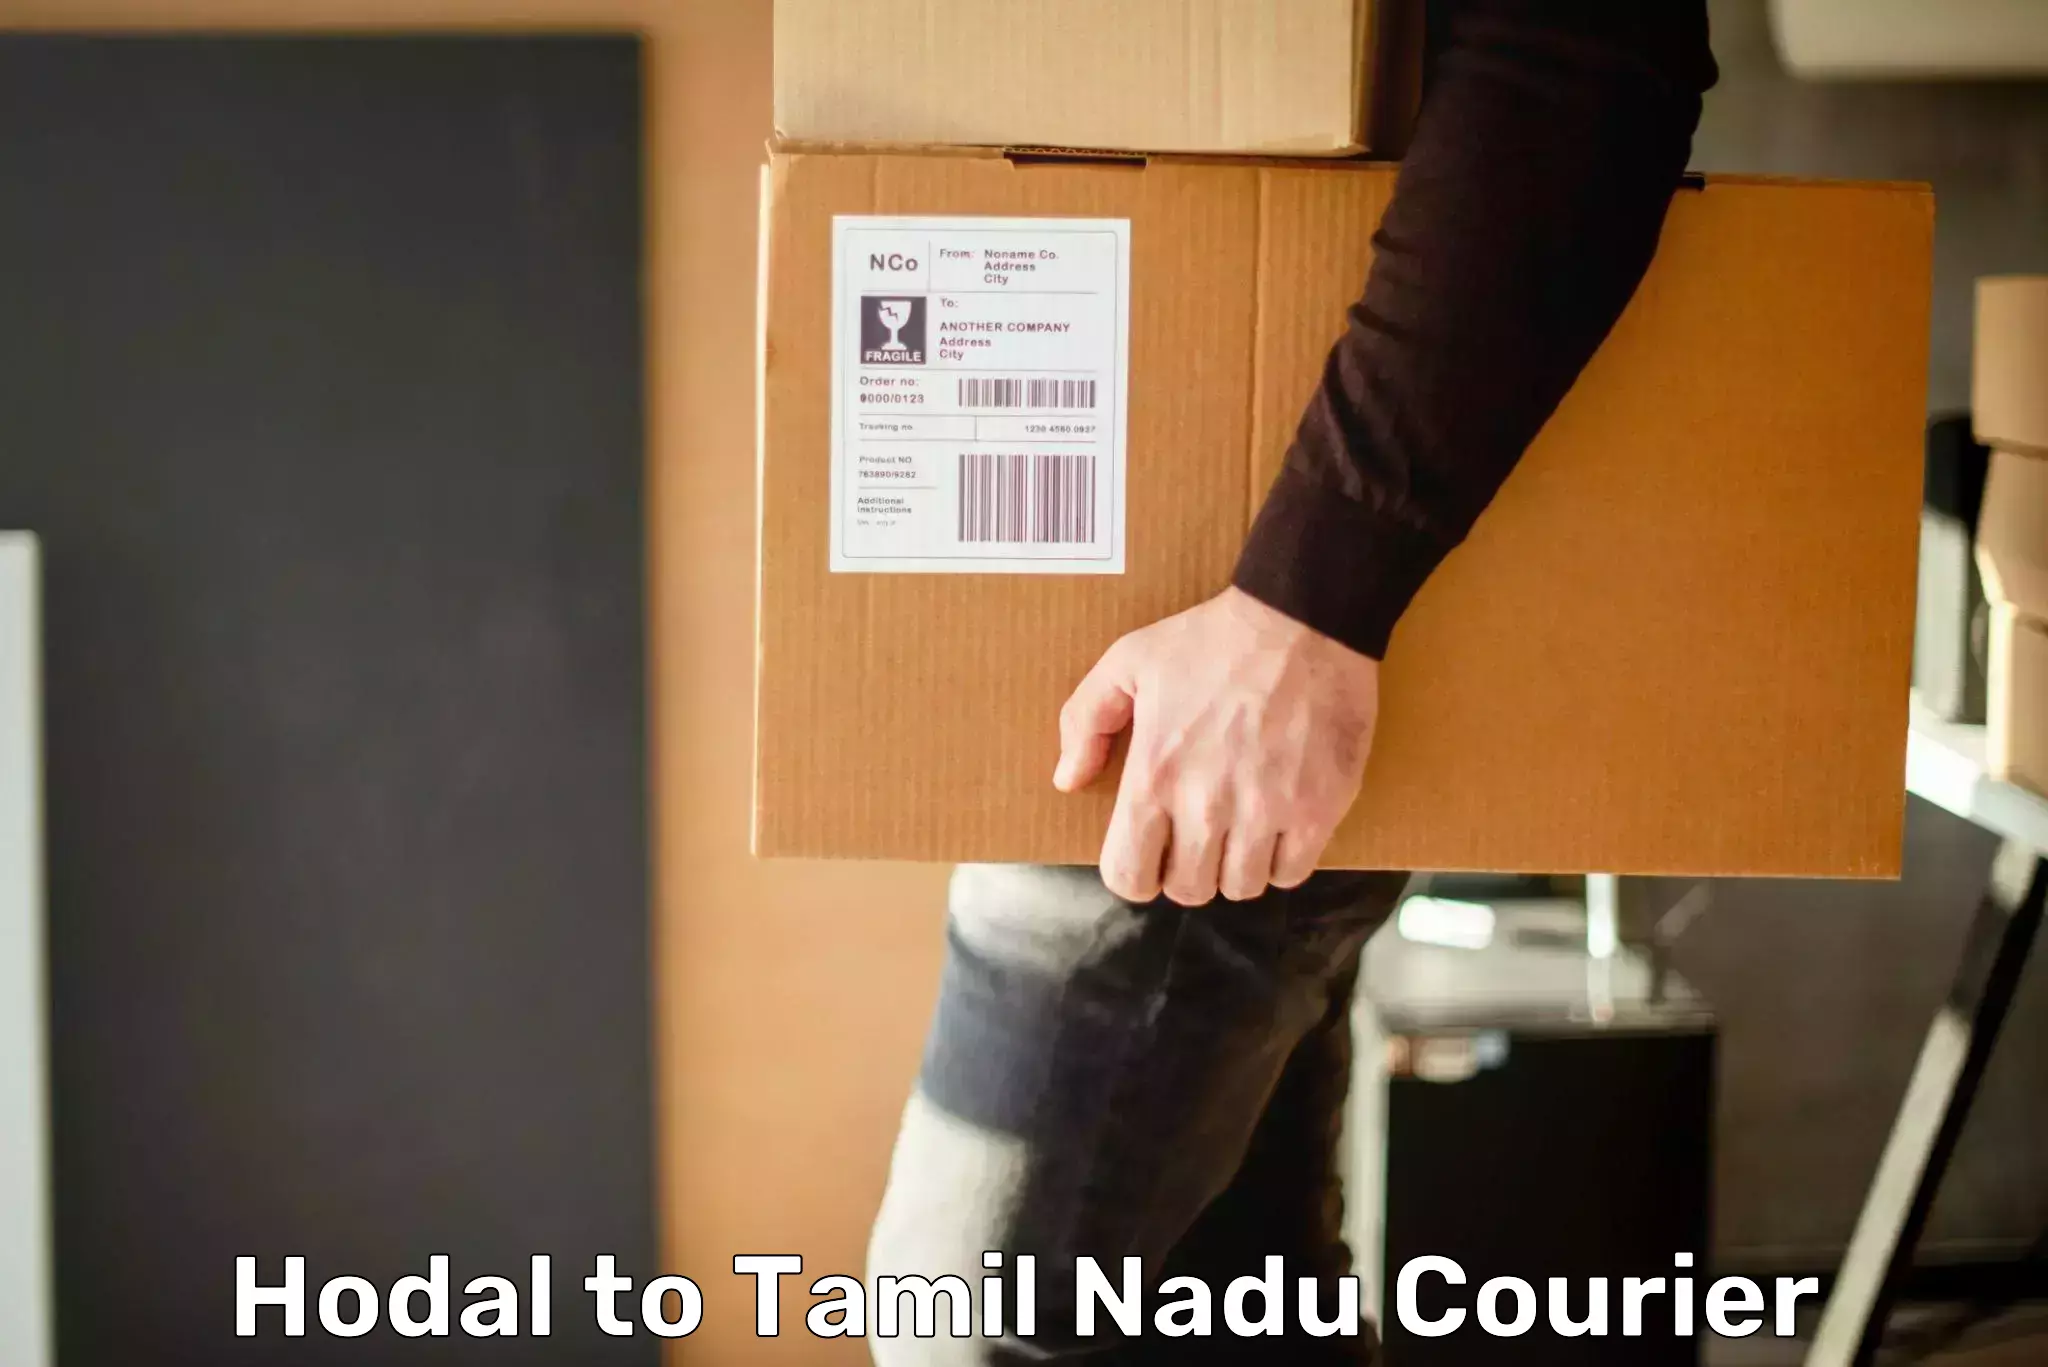 Courier service booking Hodal to Tamil Nadu